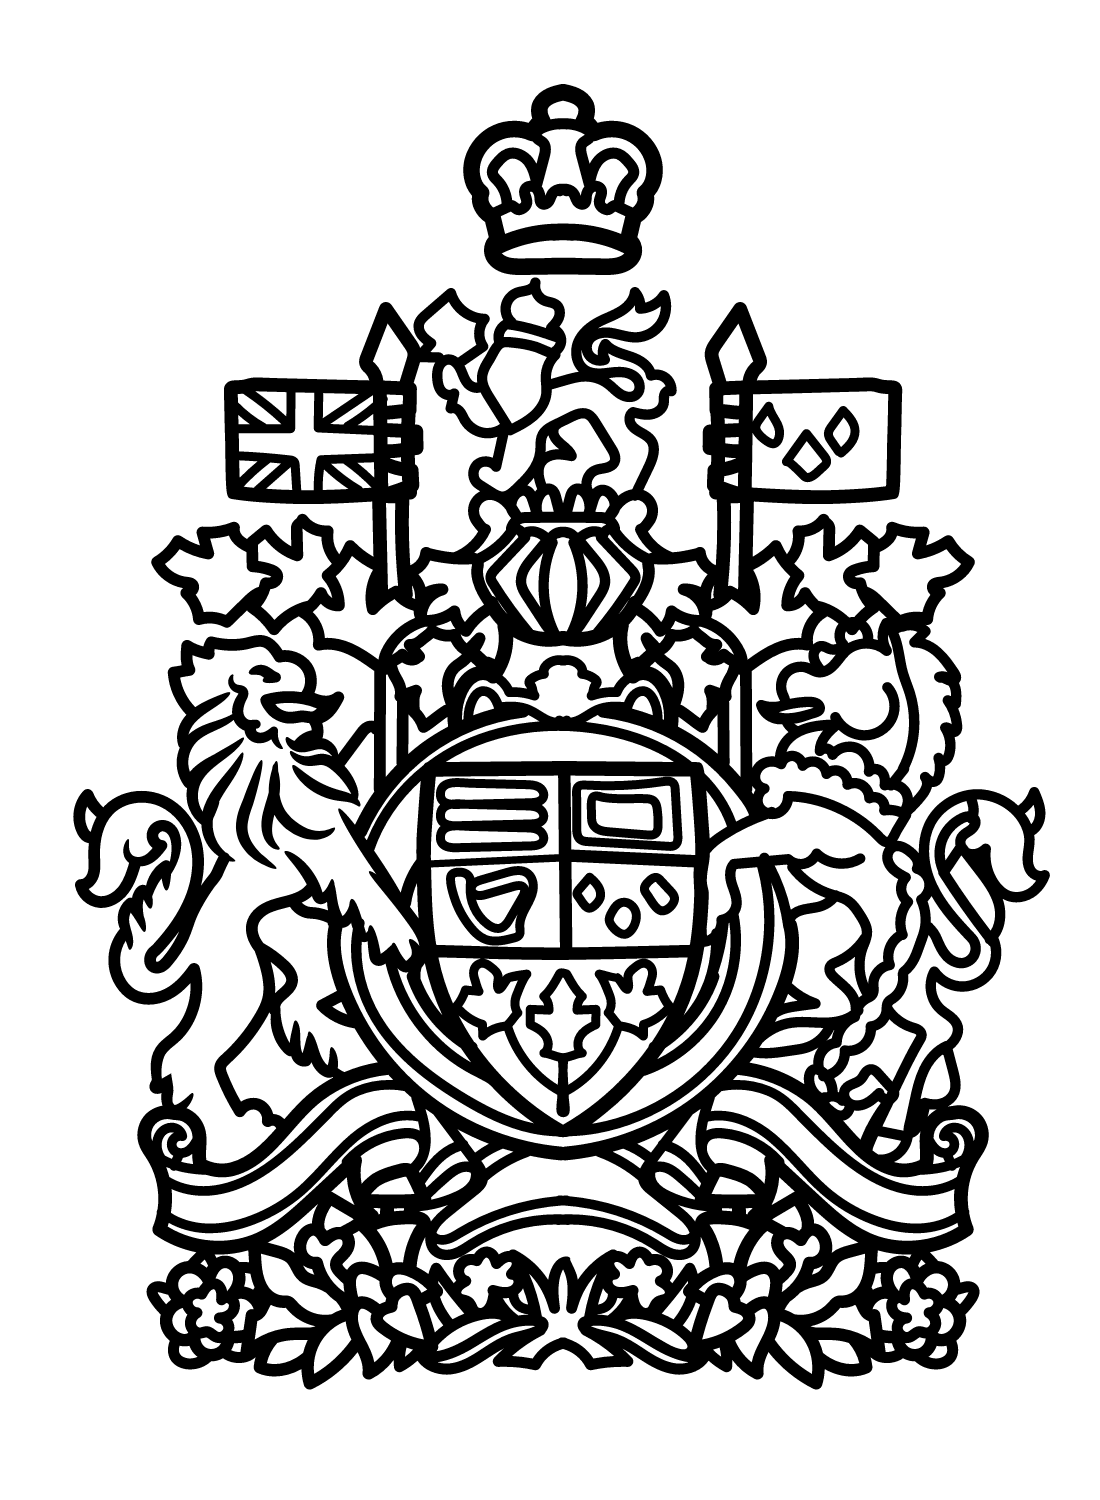 Arms of Canada Coloring Page